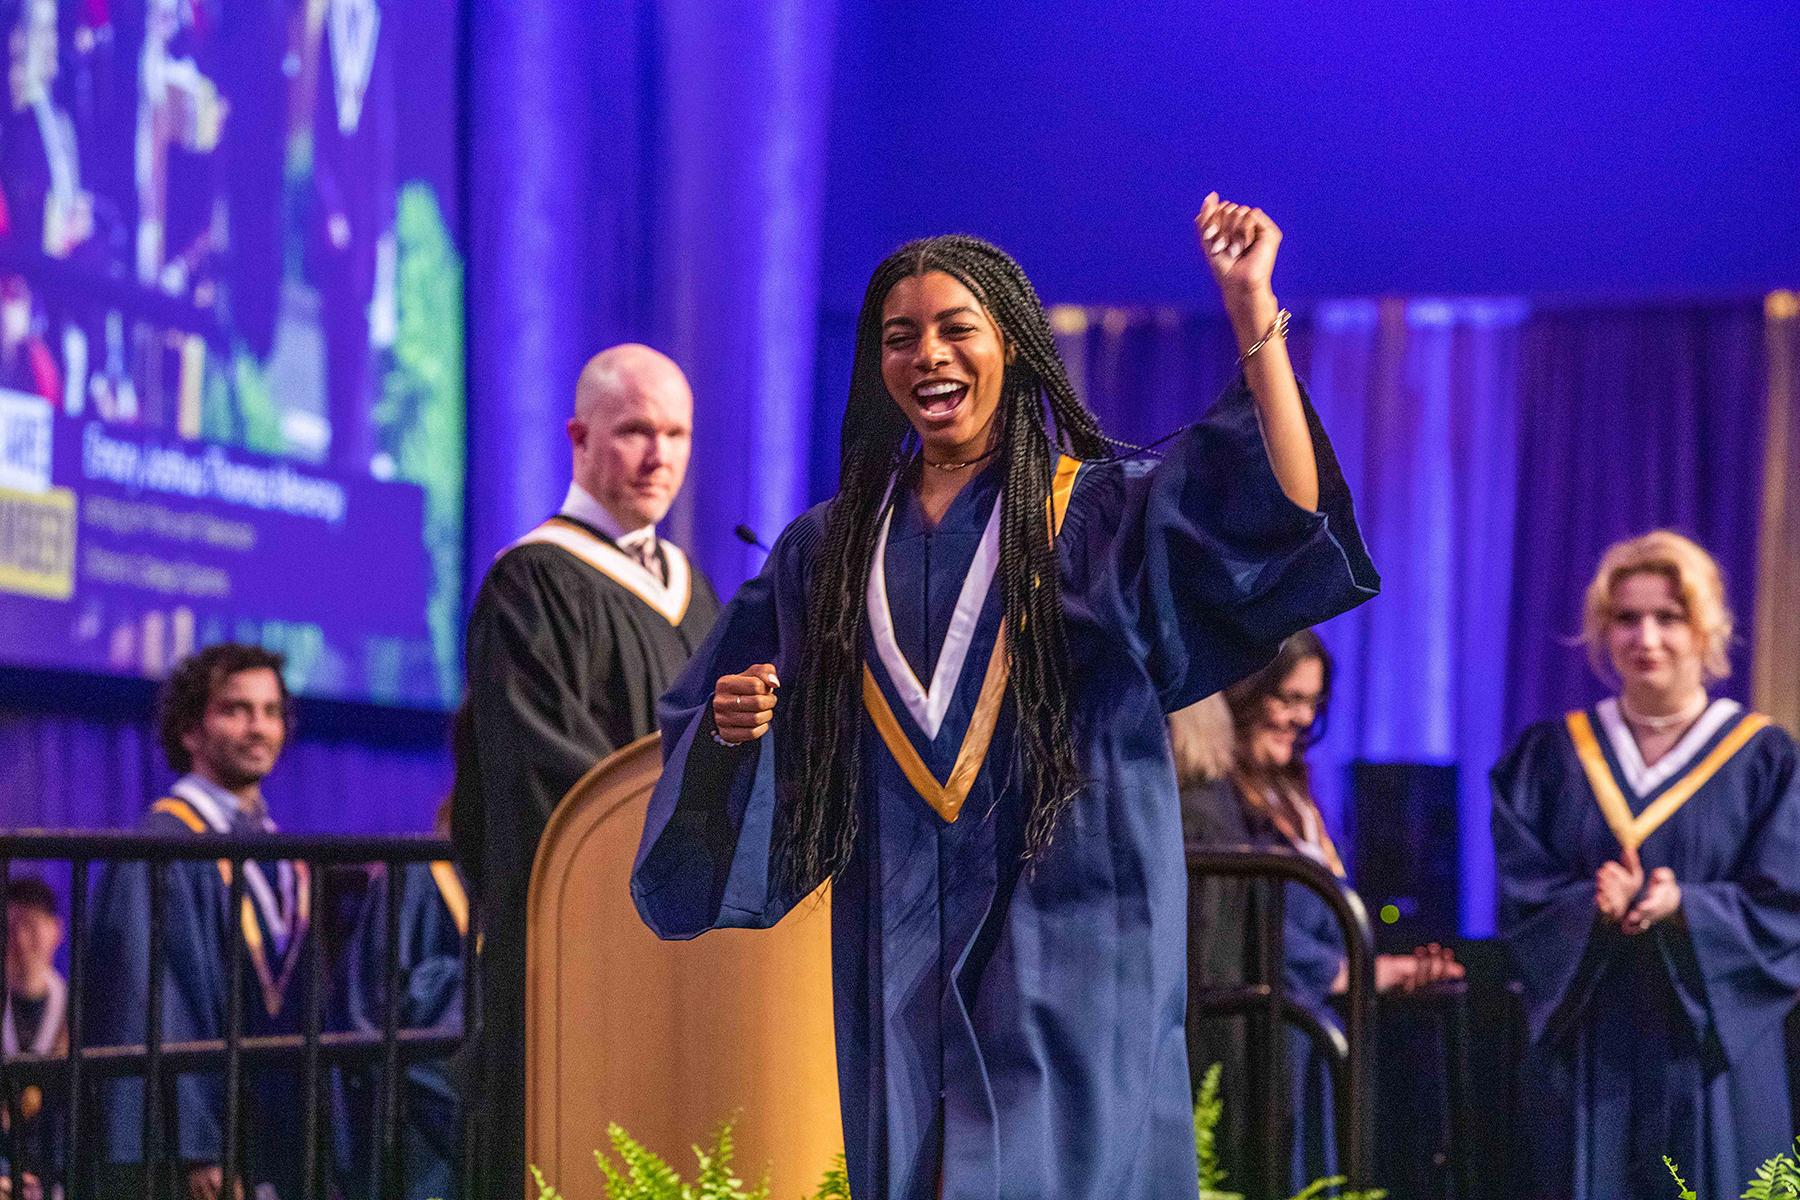 A person wearing graduation robes raises their arm and cheers as they walk across a stage.